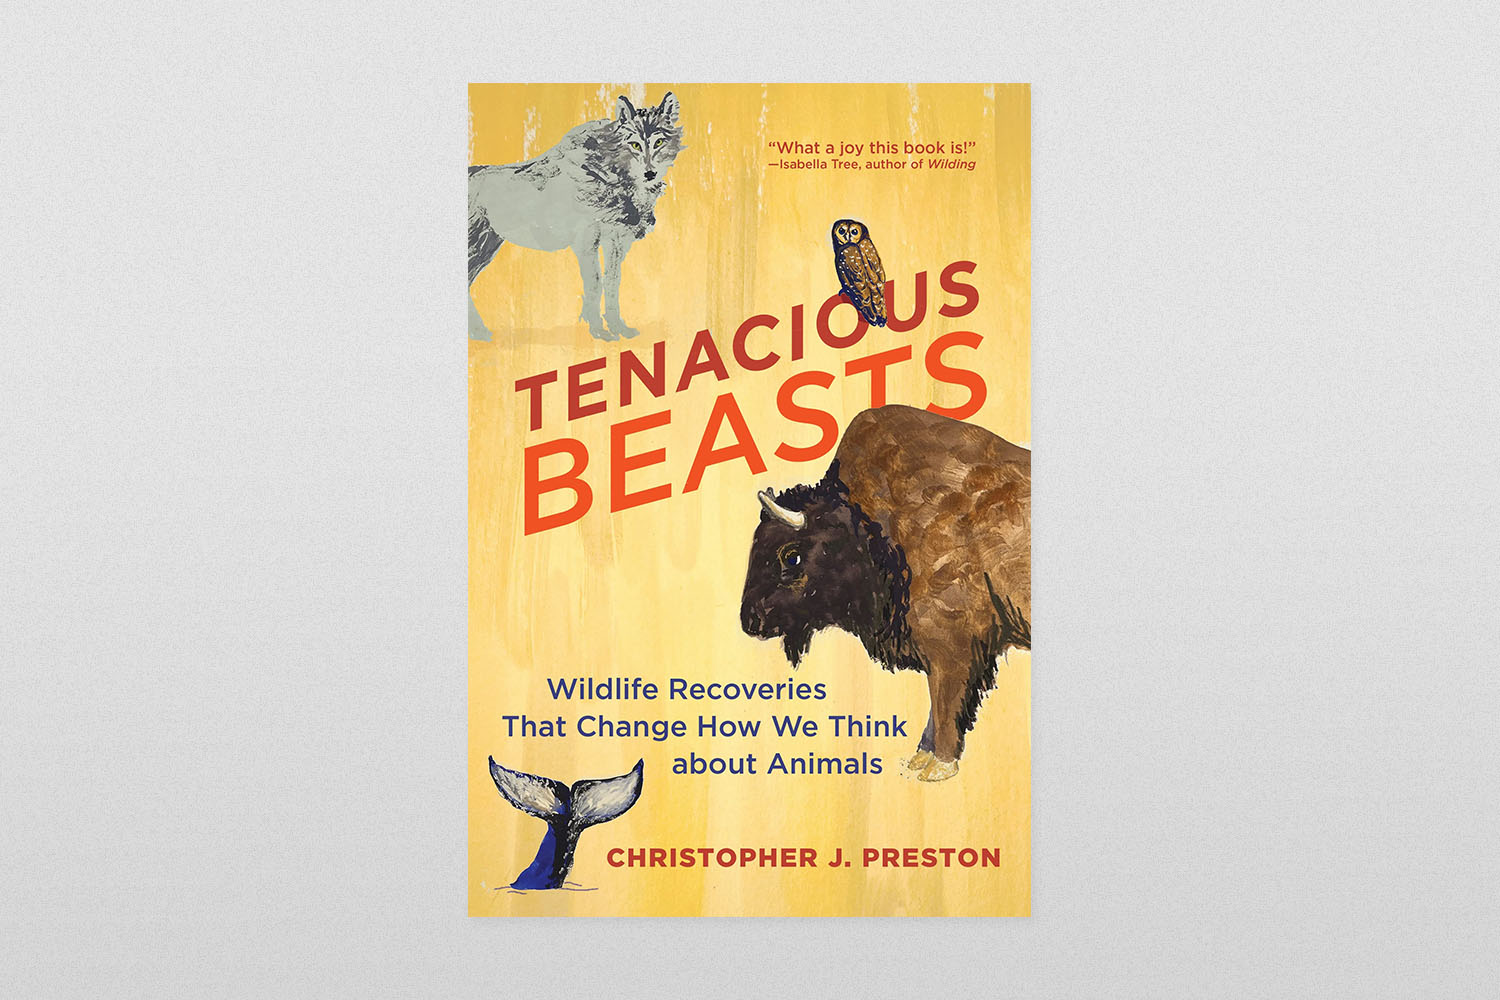 Tenacious Beasts- Wildlife Recoveries That Change How We Think about Animals by Christopher J Preston